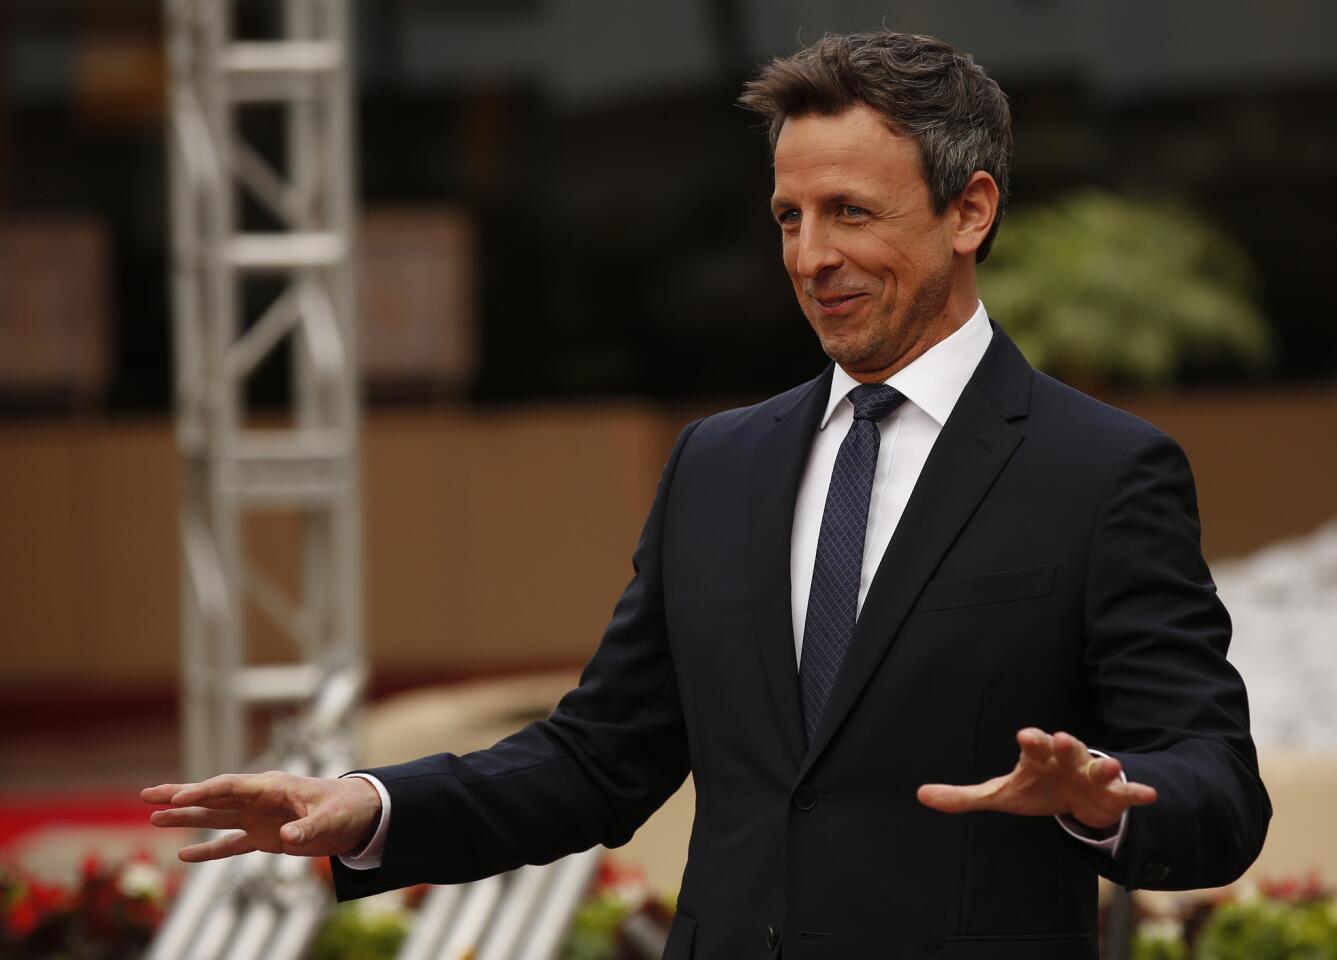 Seth Meyers at the Golden Globes' preview day on Thursday at the Beverly Hilton Hotel in Beverly Hills. Meyers will host Saturday's awards show.